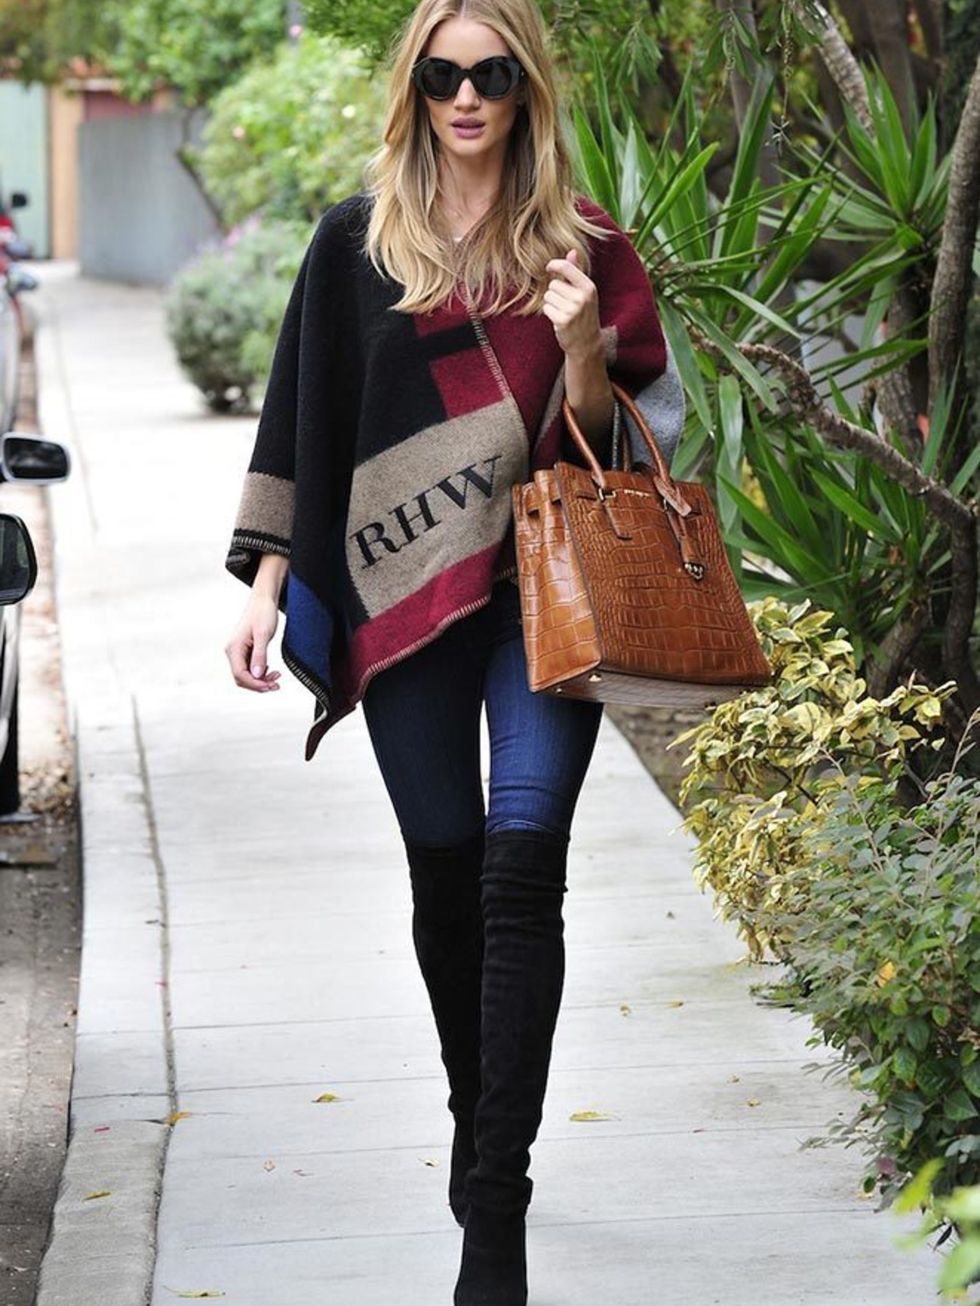 <p><a href="http://www.elleuk.com/fashion/celebrity-style/rosie-huntington-whiteley-style-file">Rosie Huntington-Whiteley</a> wears a custom Burberry poncho while out and about in LA.</p>